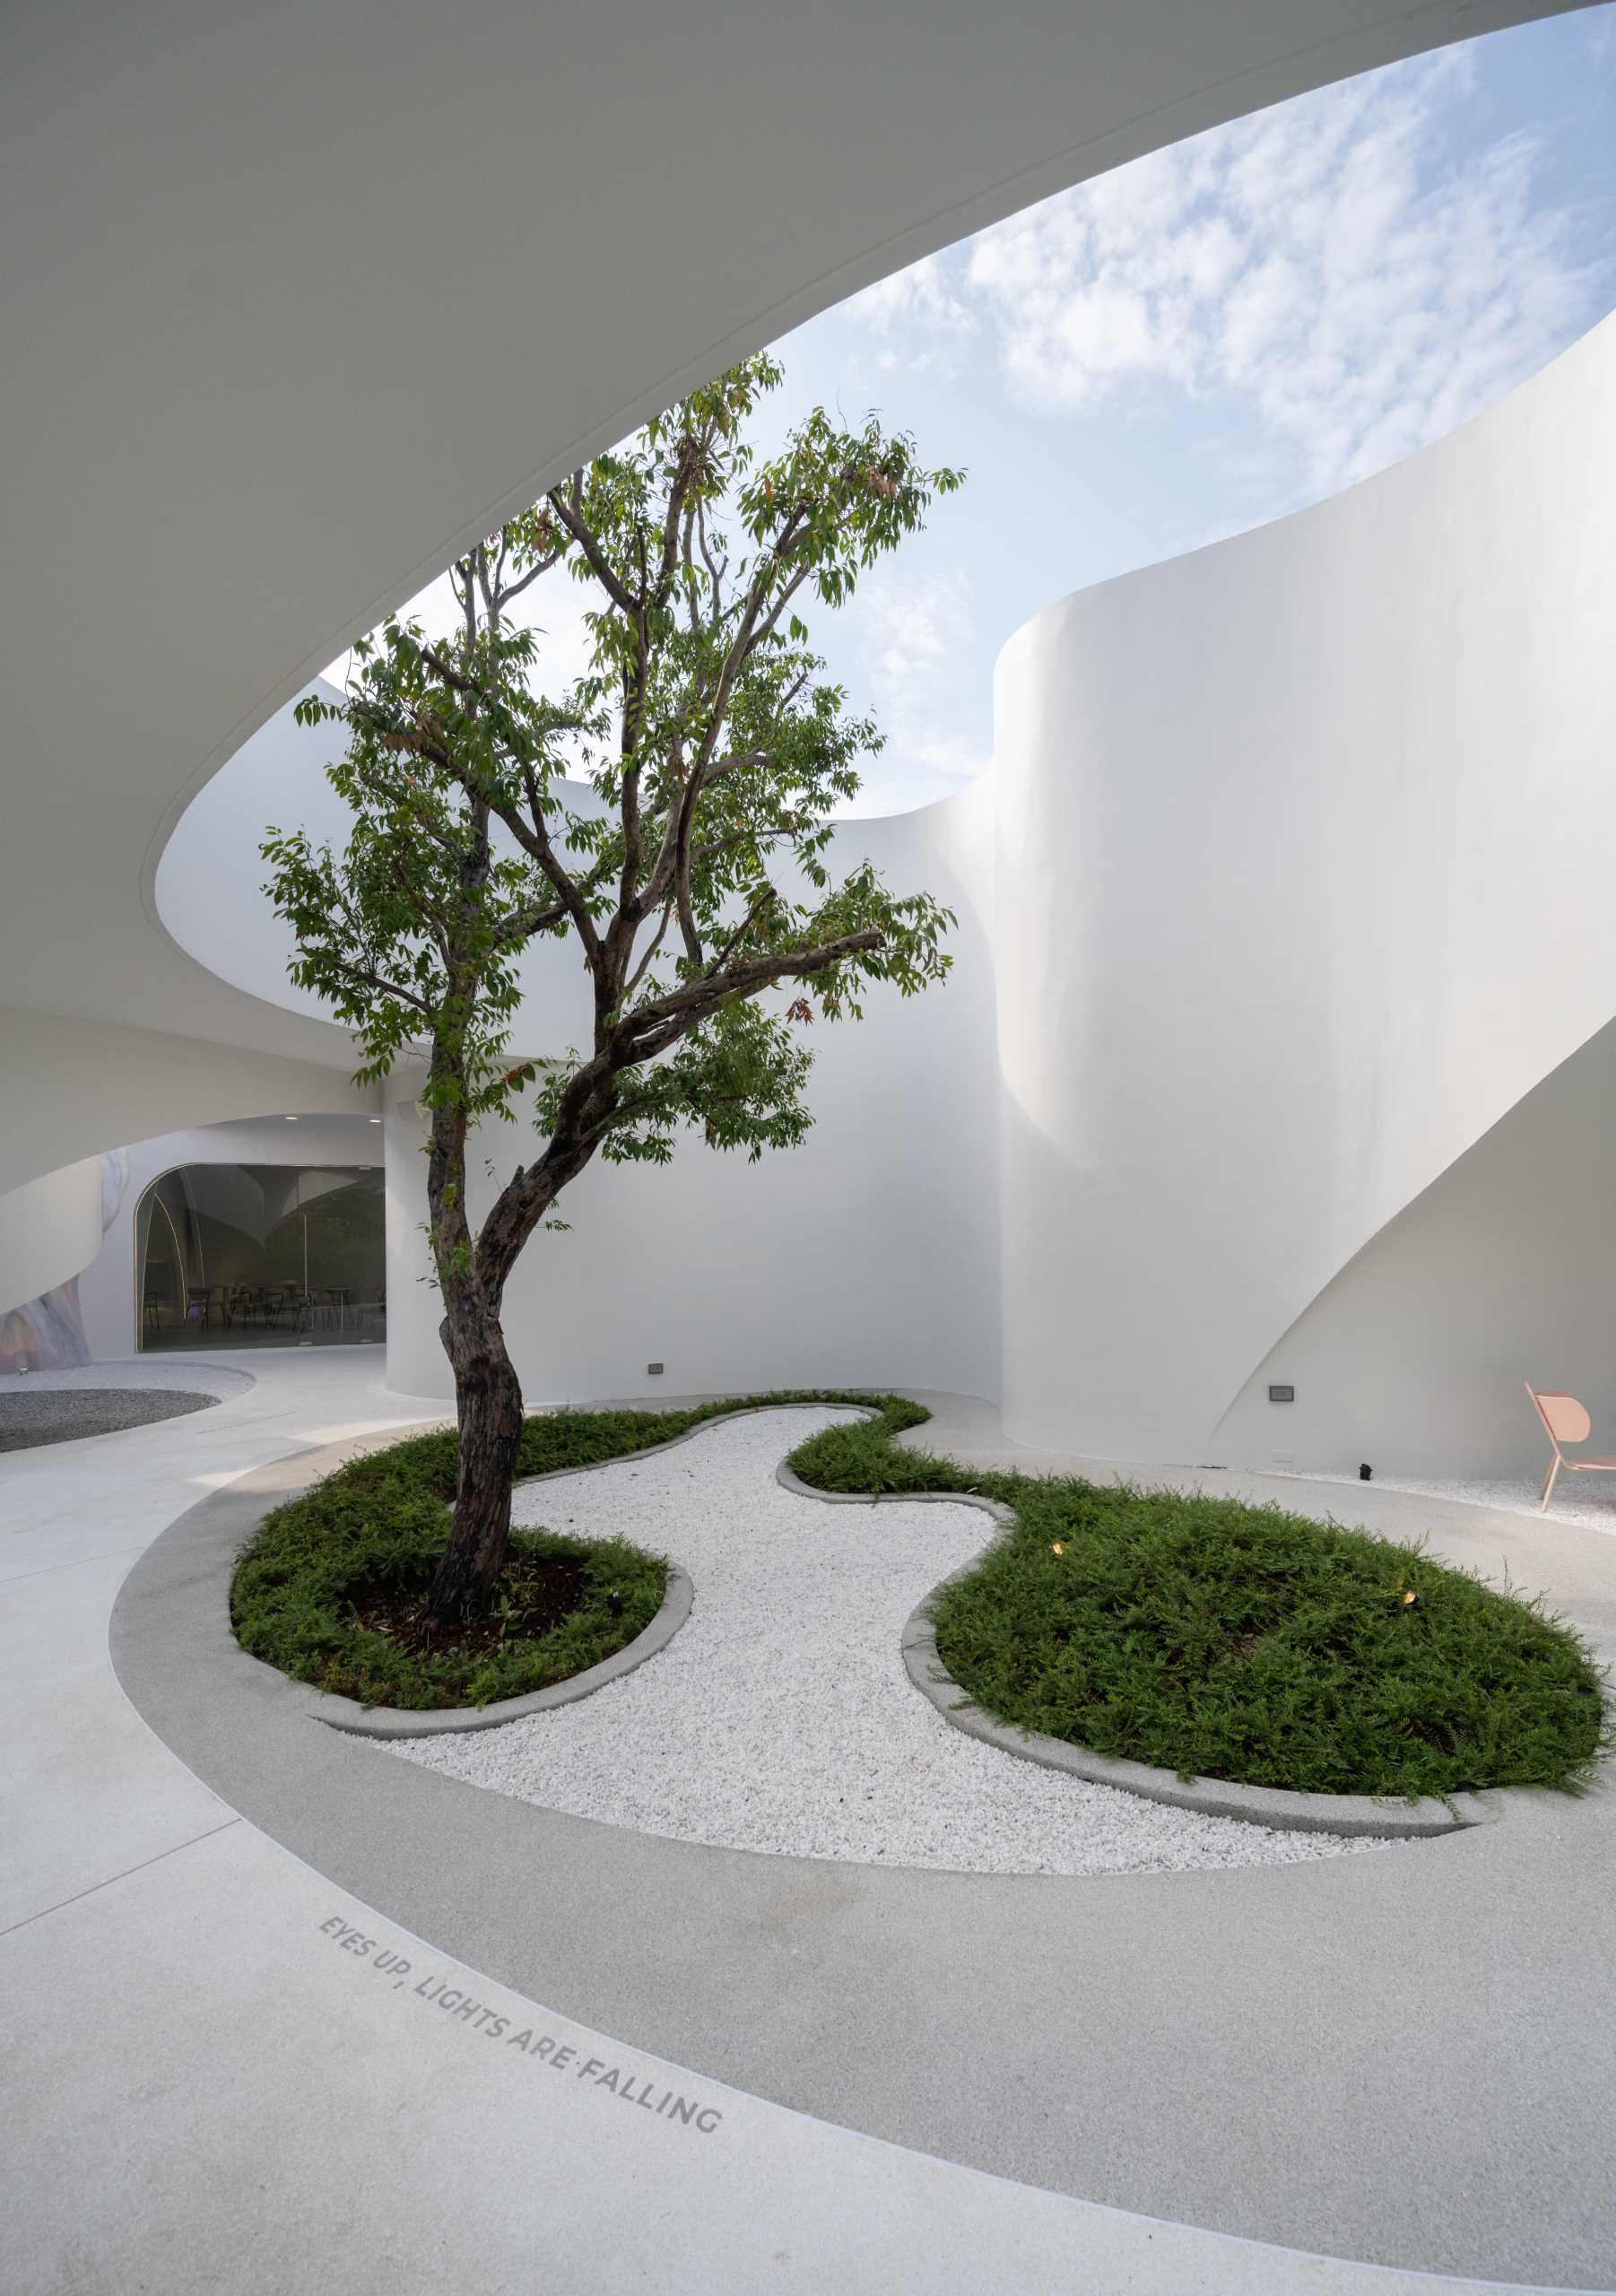 A coffee shop courtyard, open to the elements, includes a small garden with a tree, that draws your eye upward to the sky.